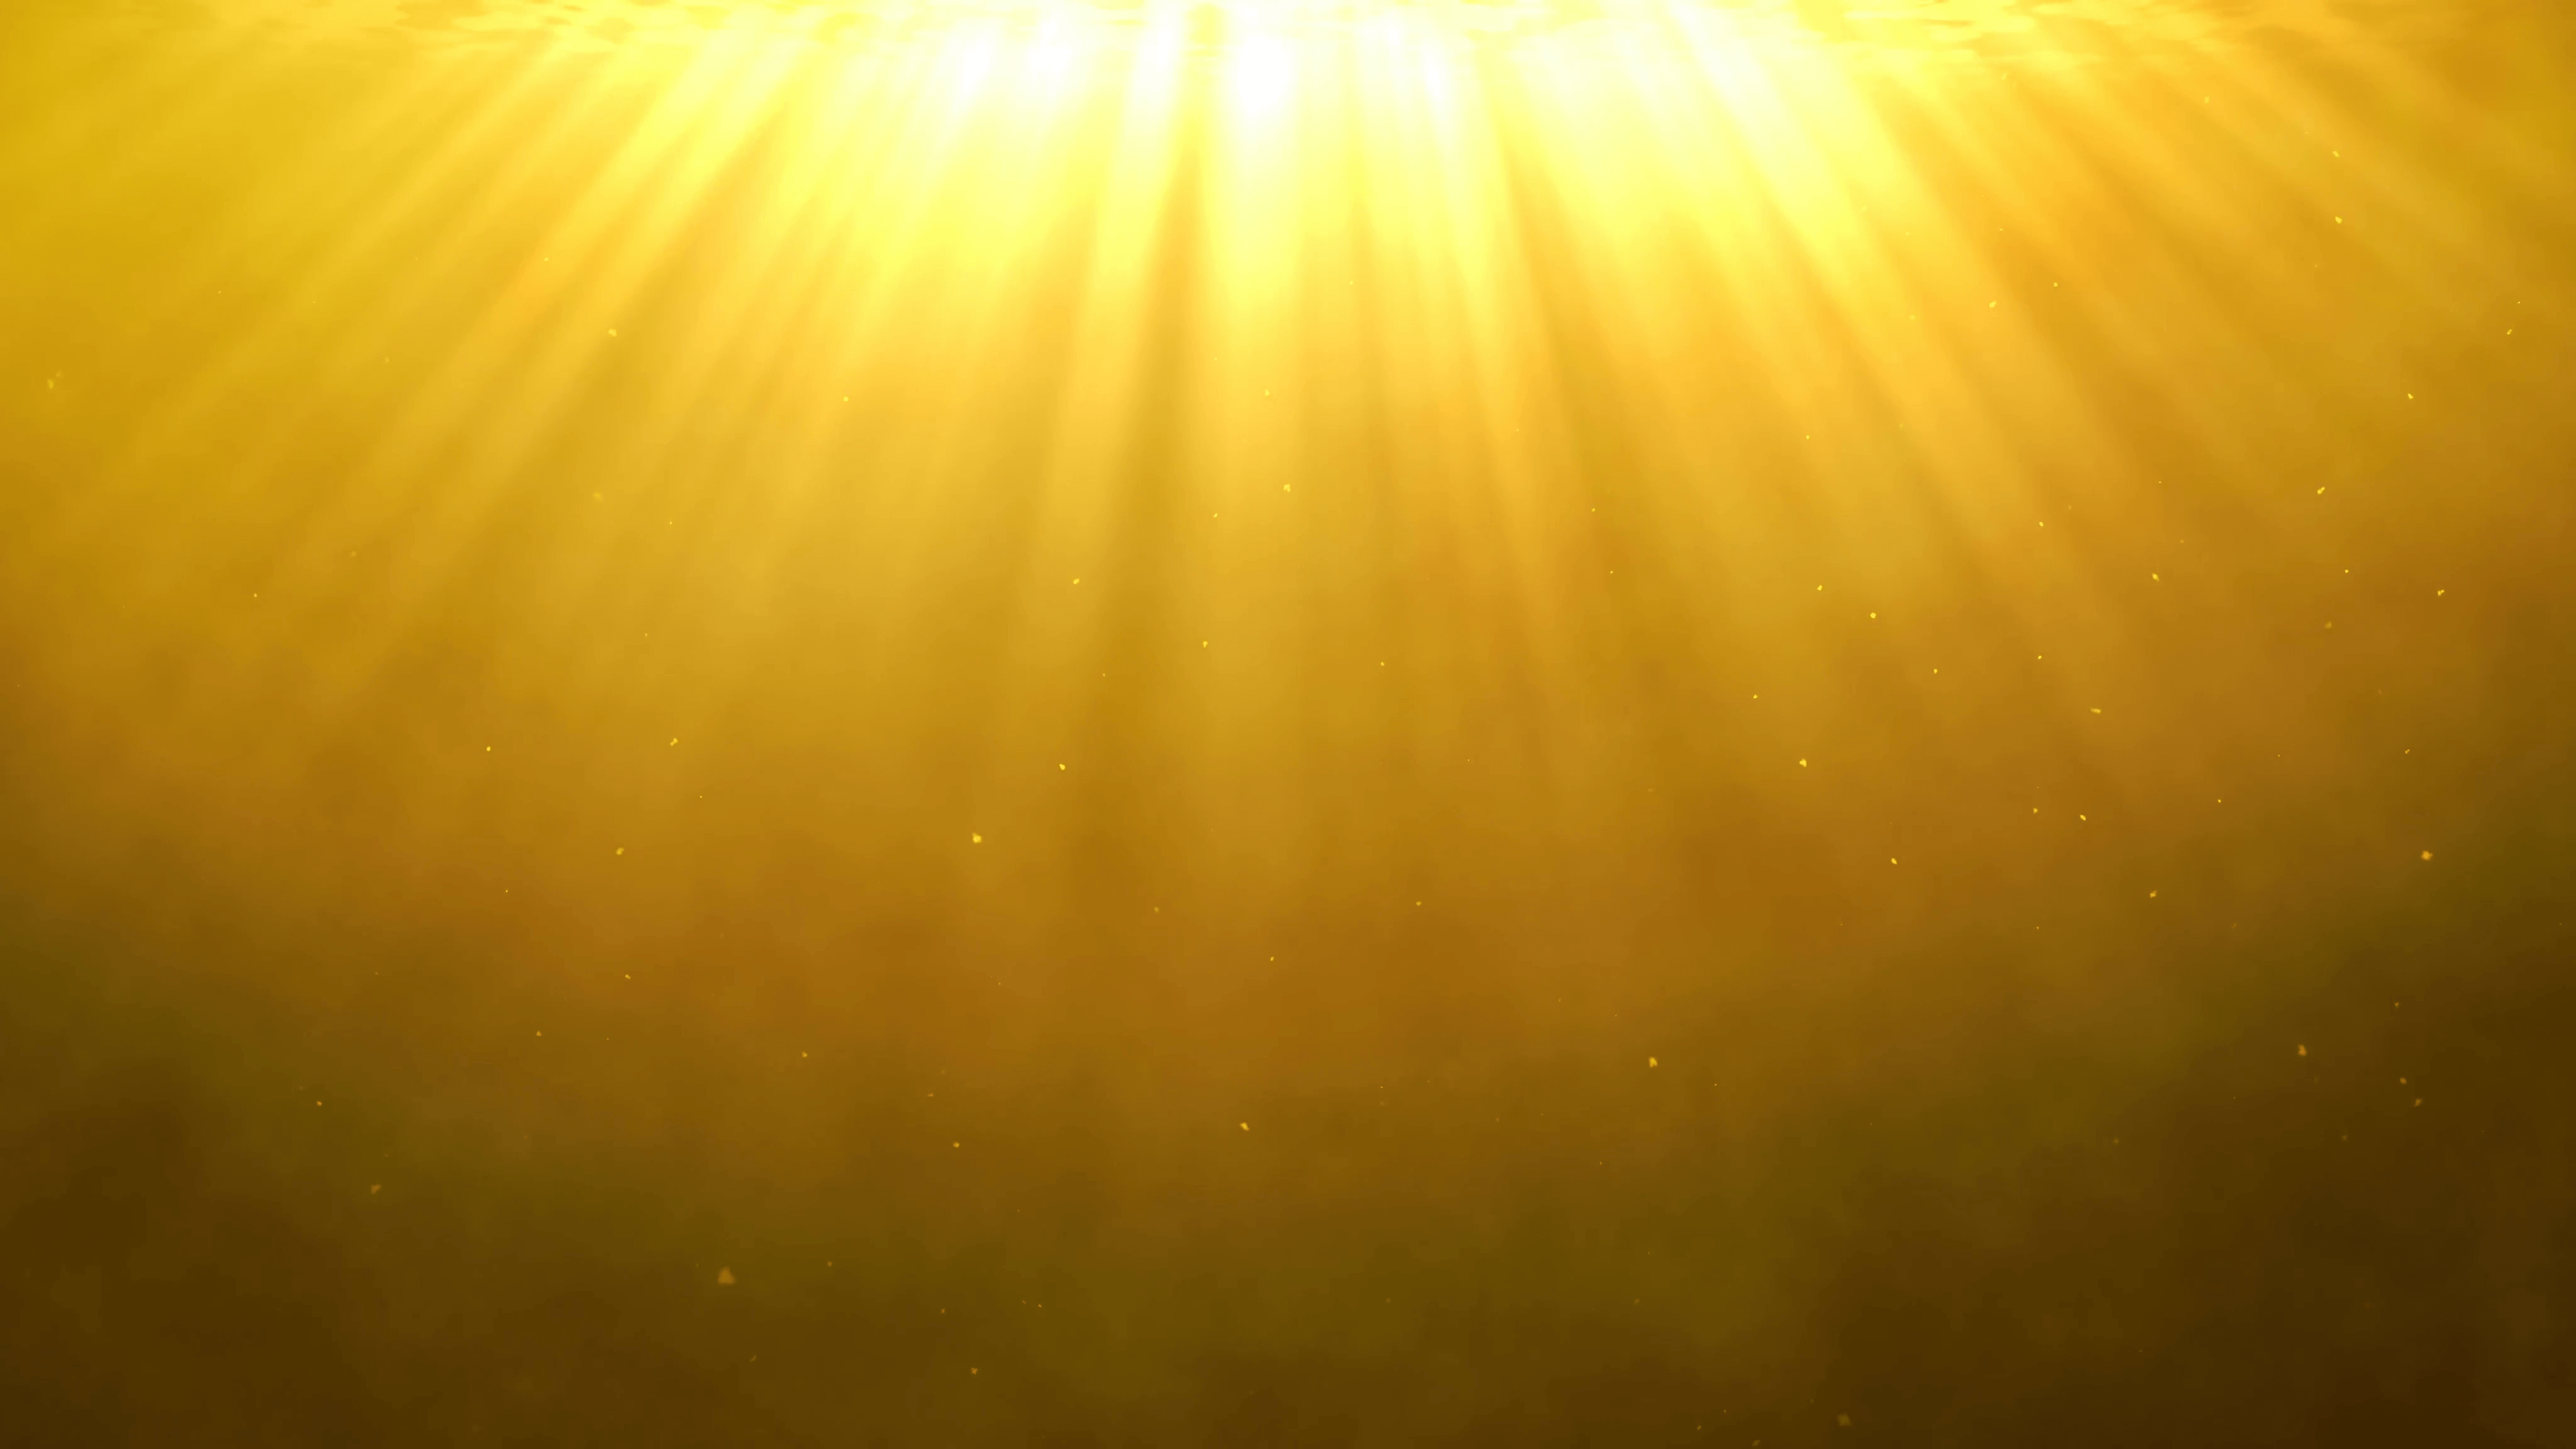 Divine light shining from above on a golden background with dust